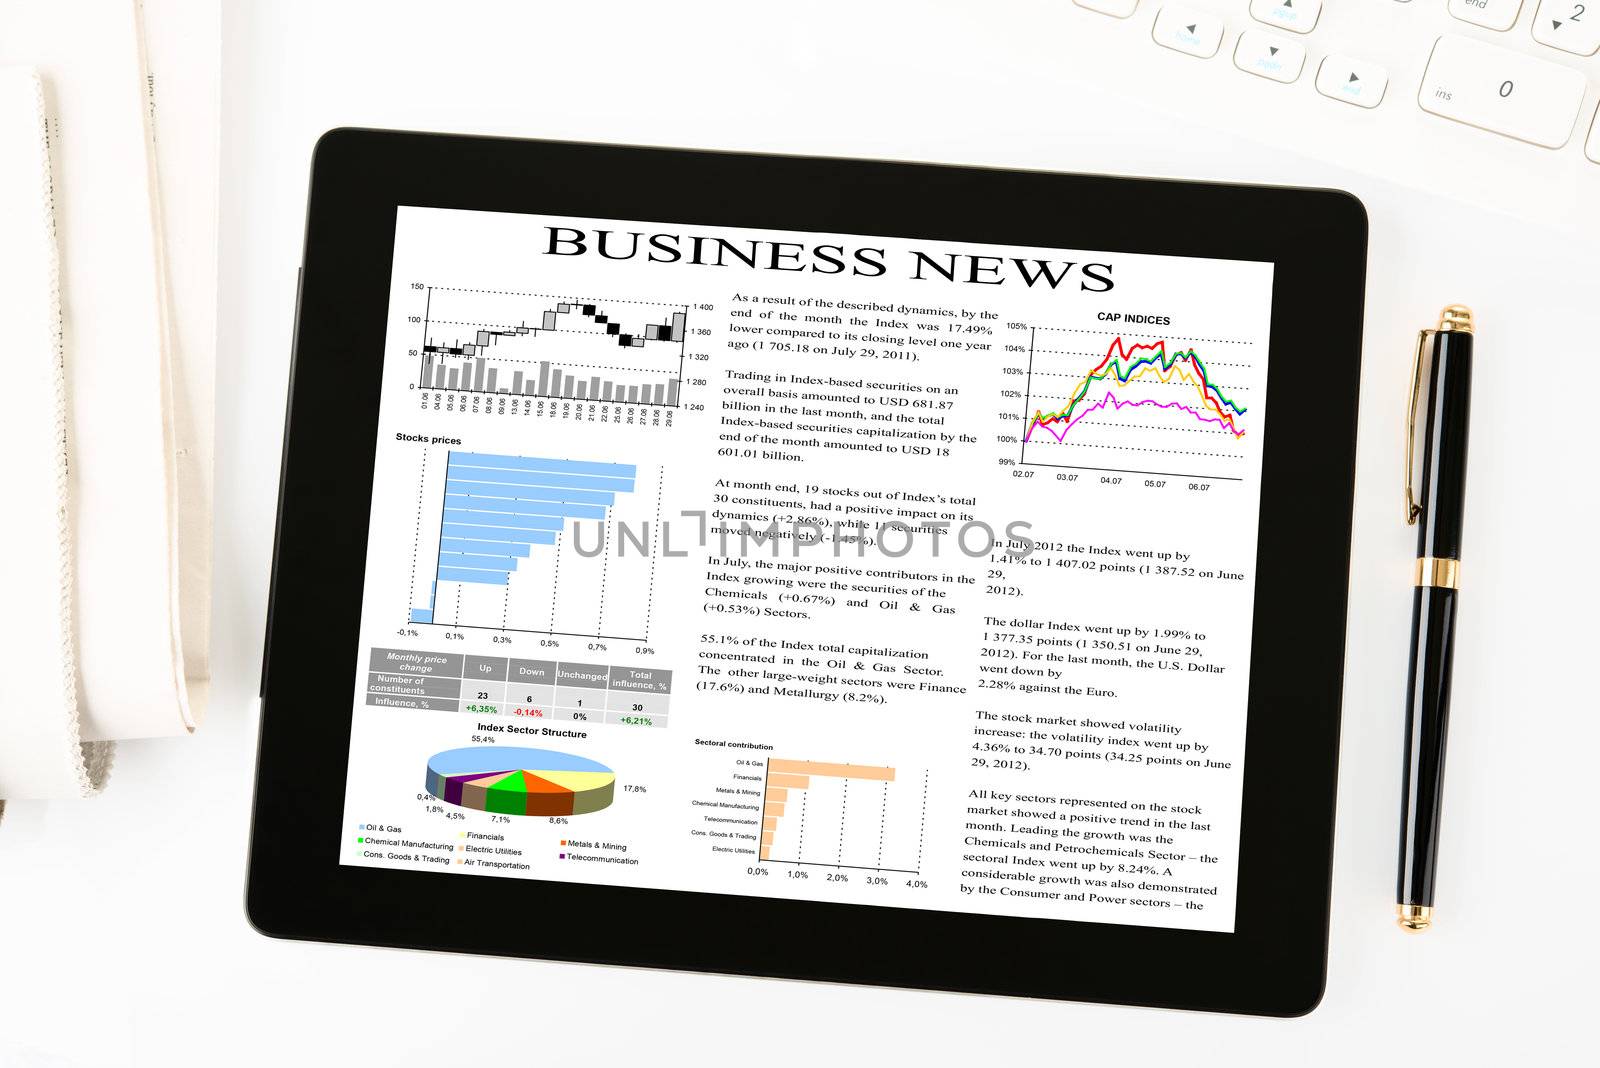 digital tablet with business news on screen